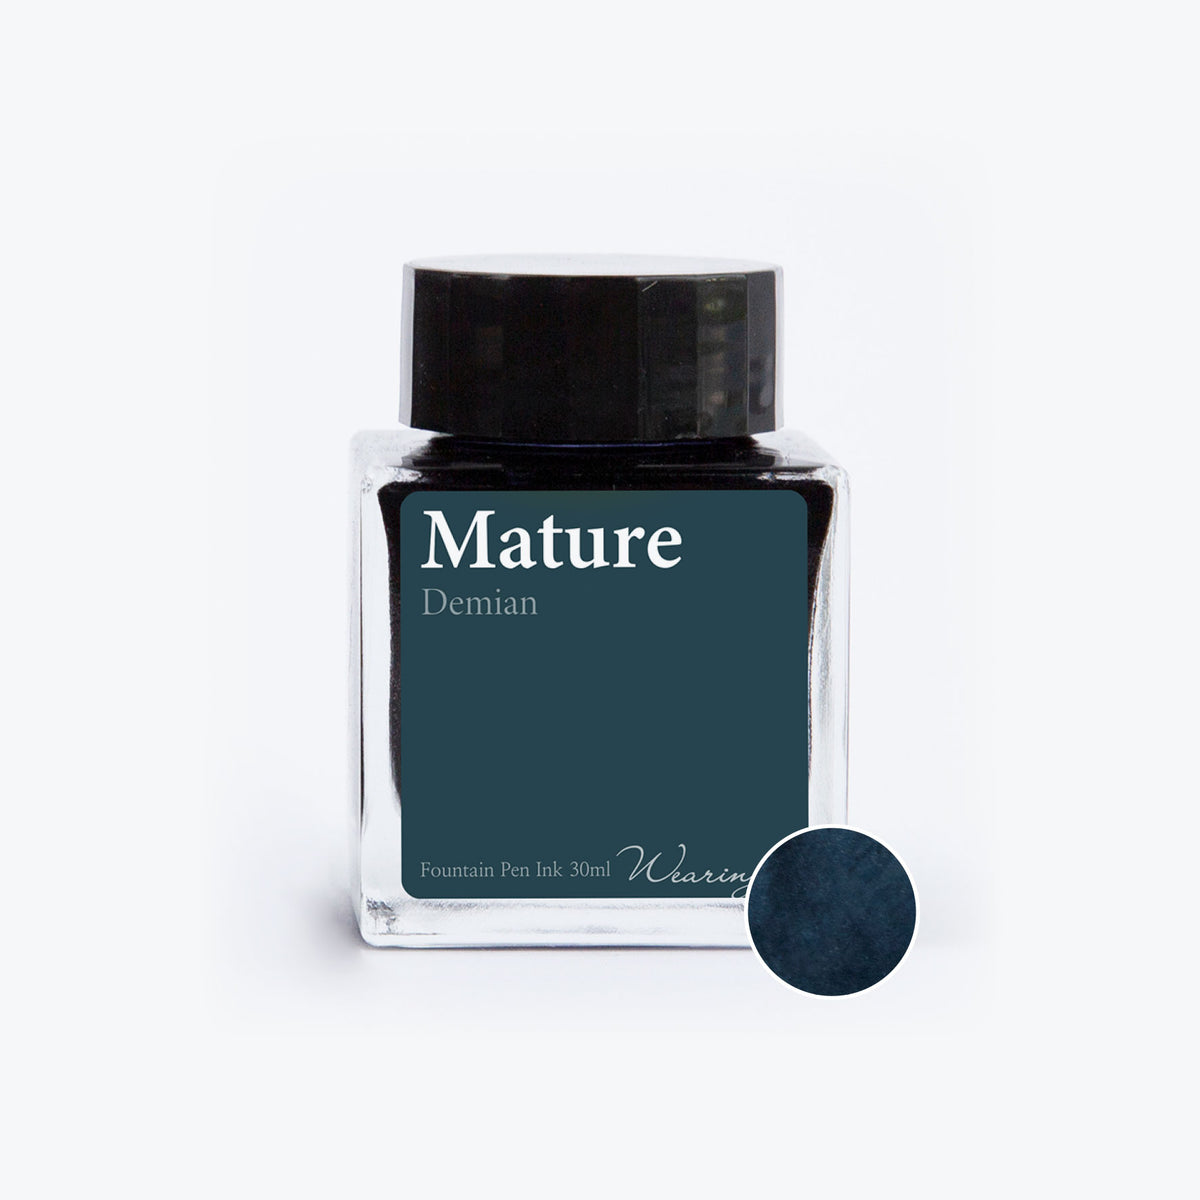 Wearingeul - Fountain Pen Ink - Mature <Outgoing>